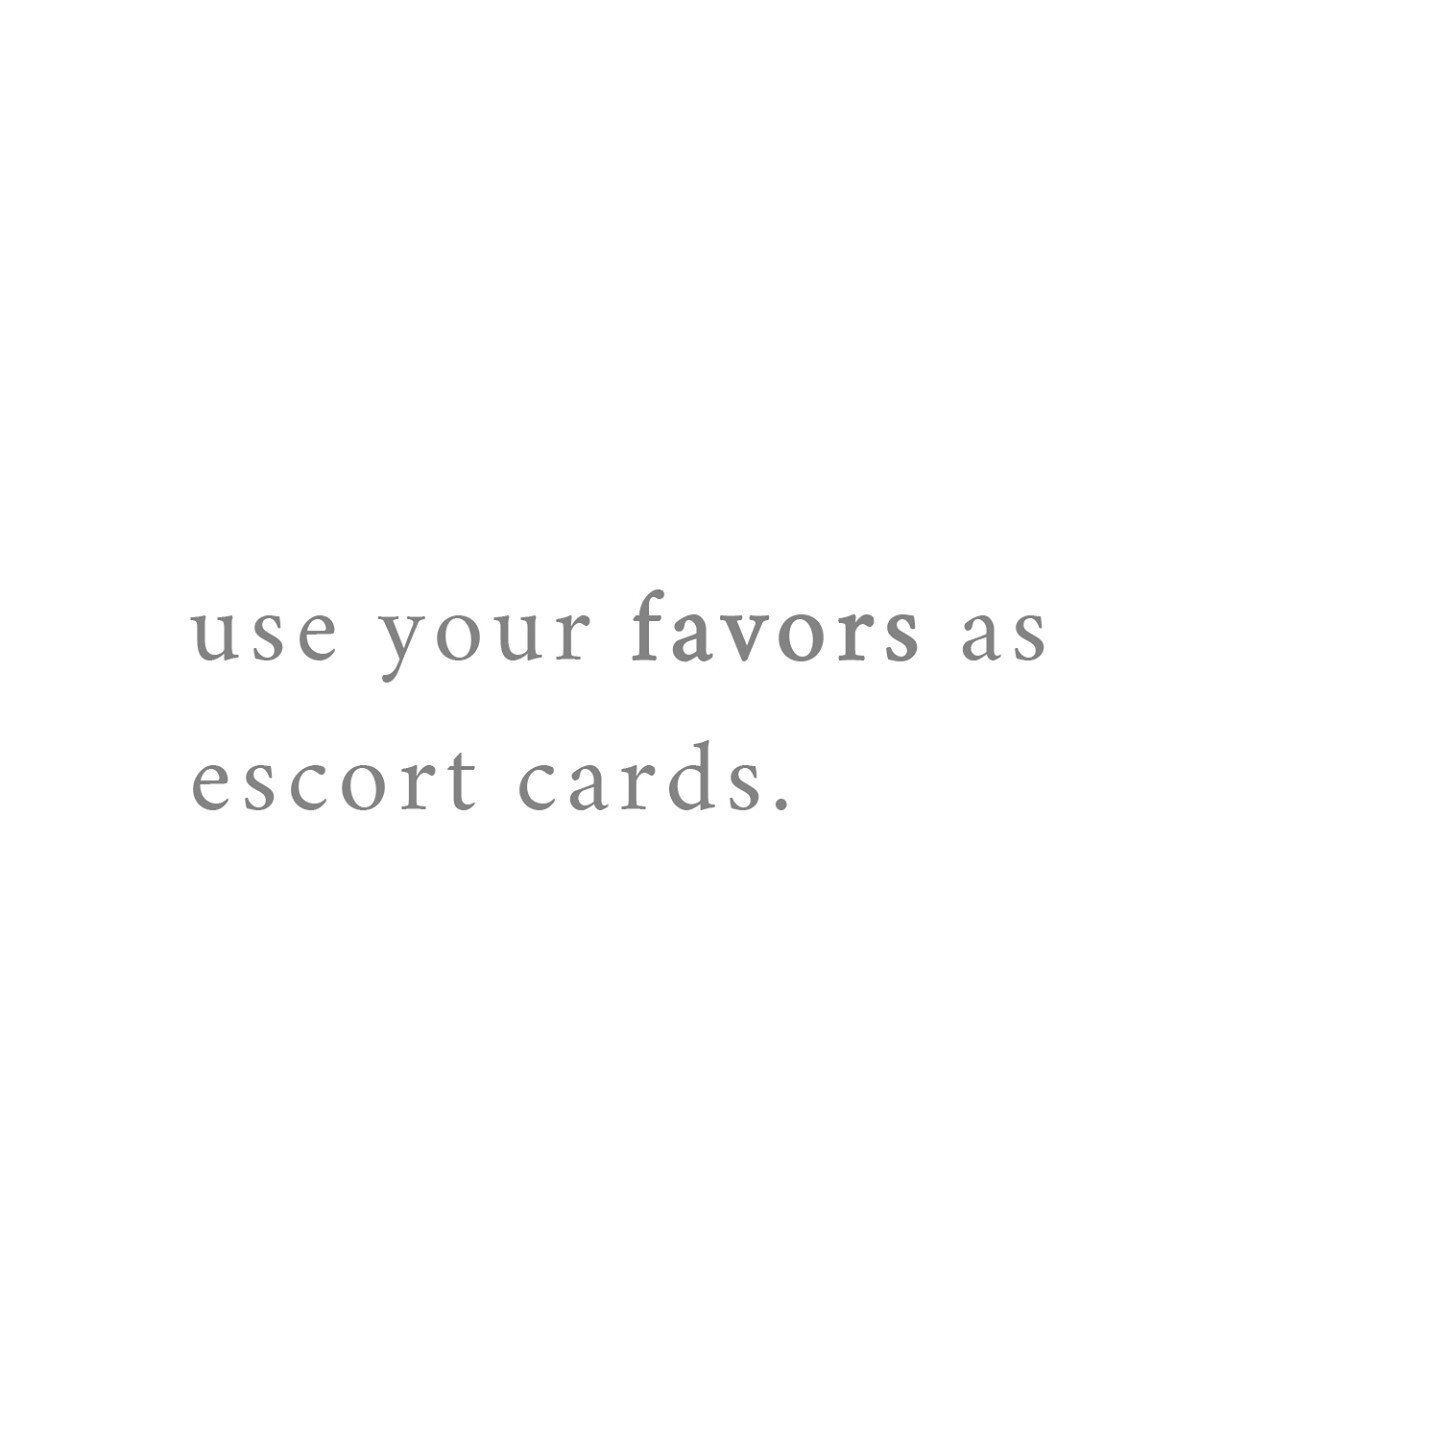 Instead of a seating chart or traditional #escortcard display, design your favors with either a label or a tag attached. Then use that tag as your escort card with seating assignment! Lay them all out on a table or shelving, or other themed display, 